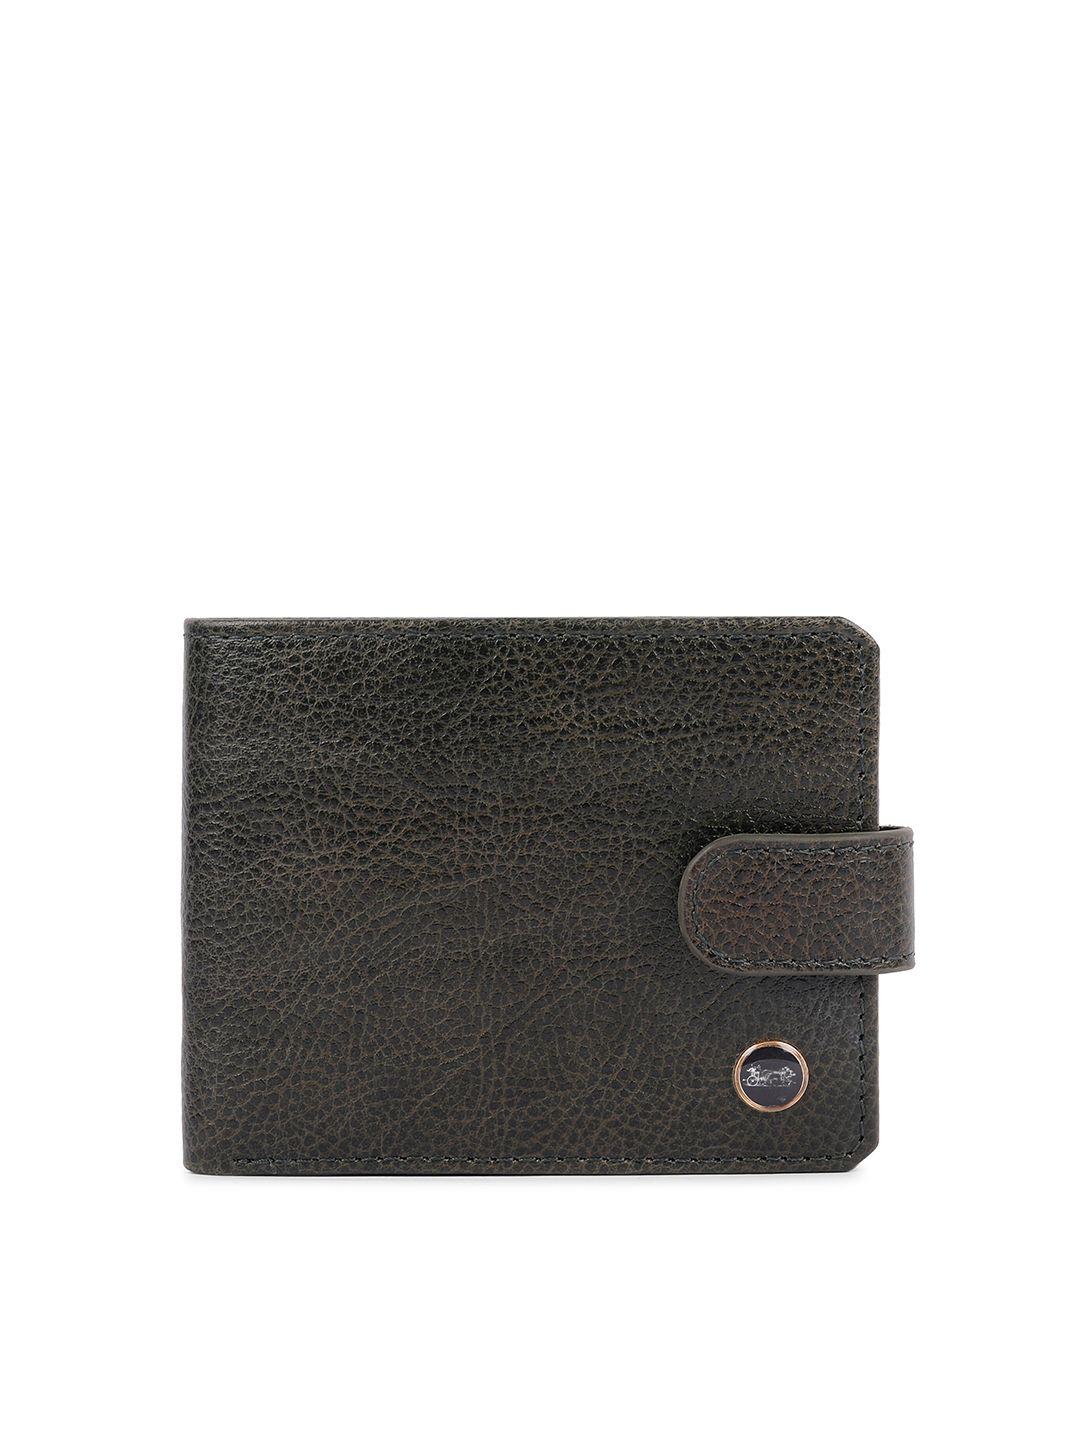 belwaba men olive green textured leather two fold wallet